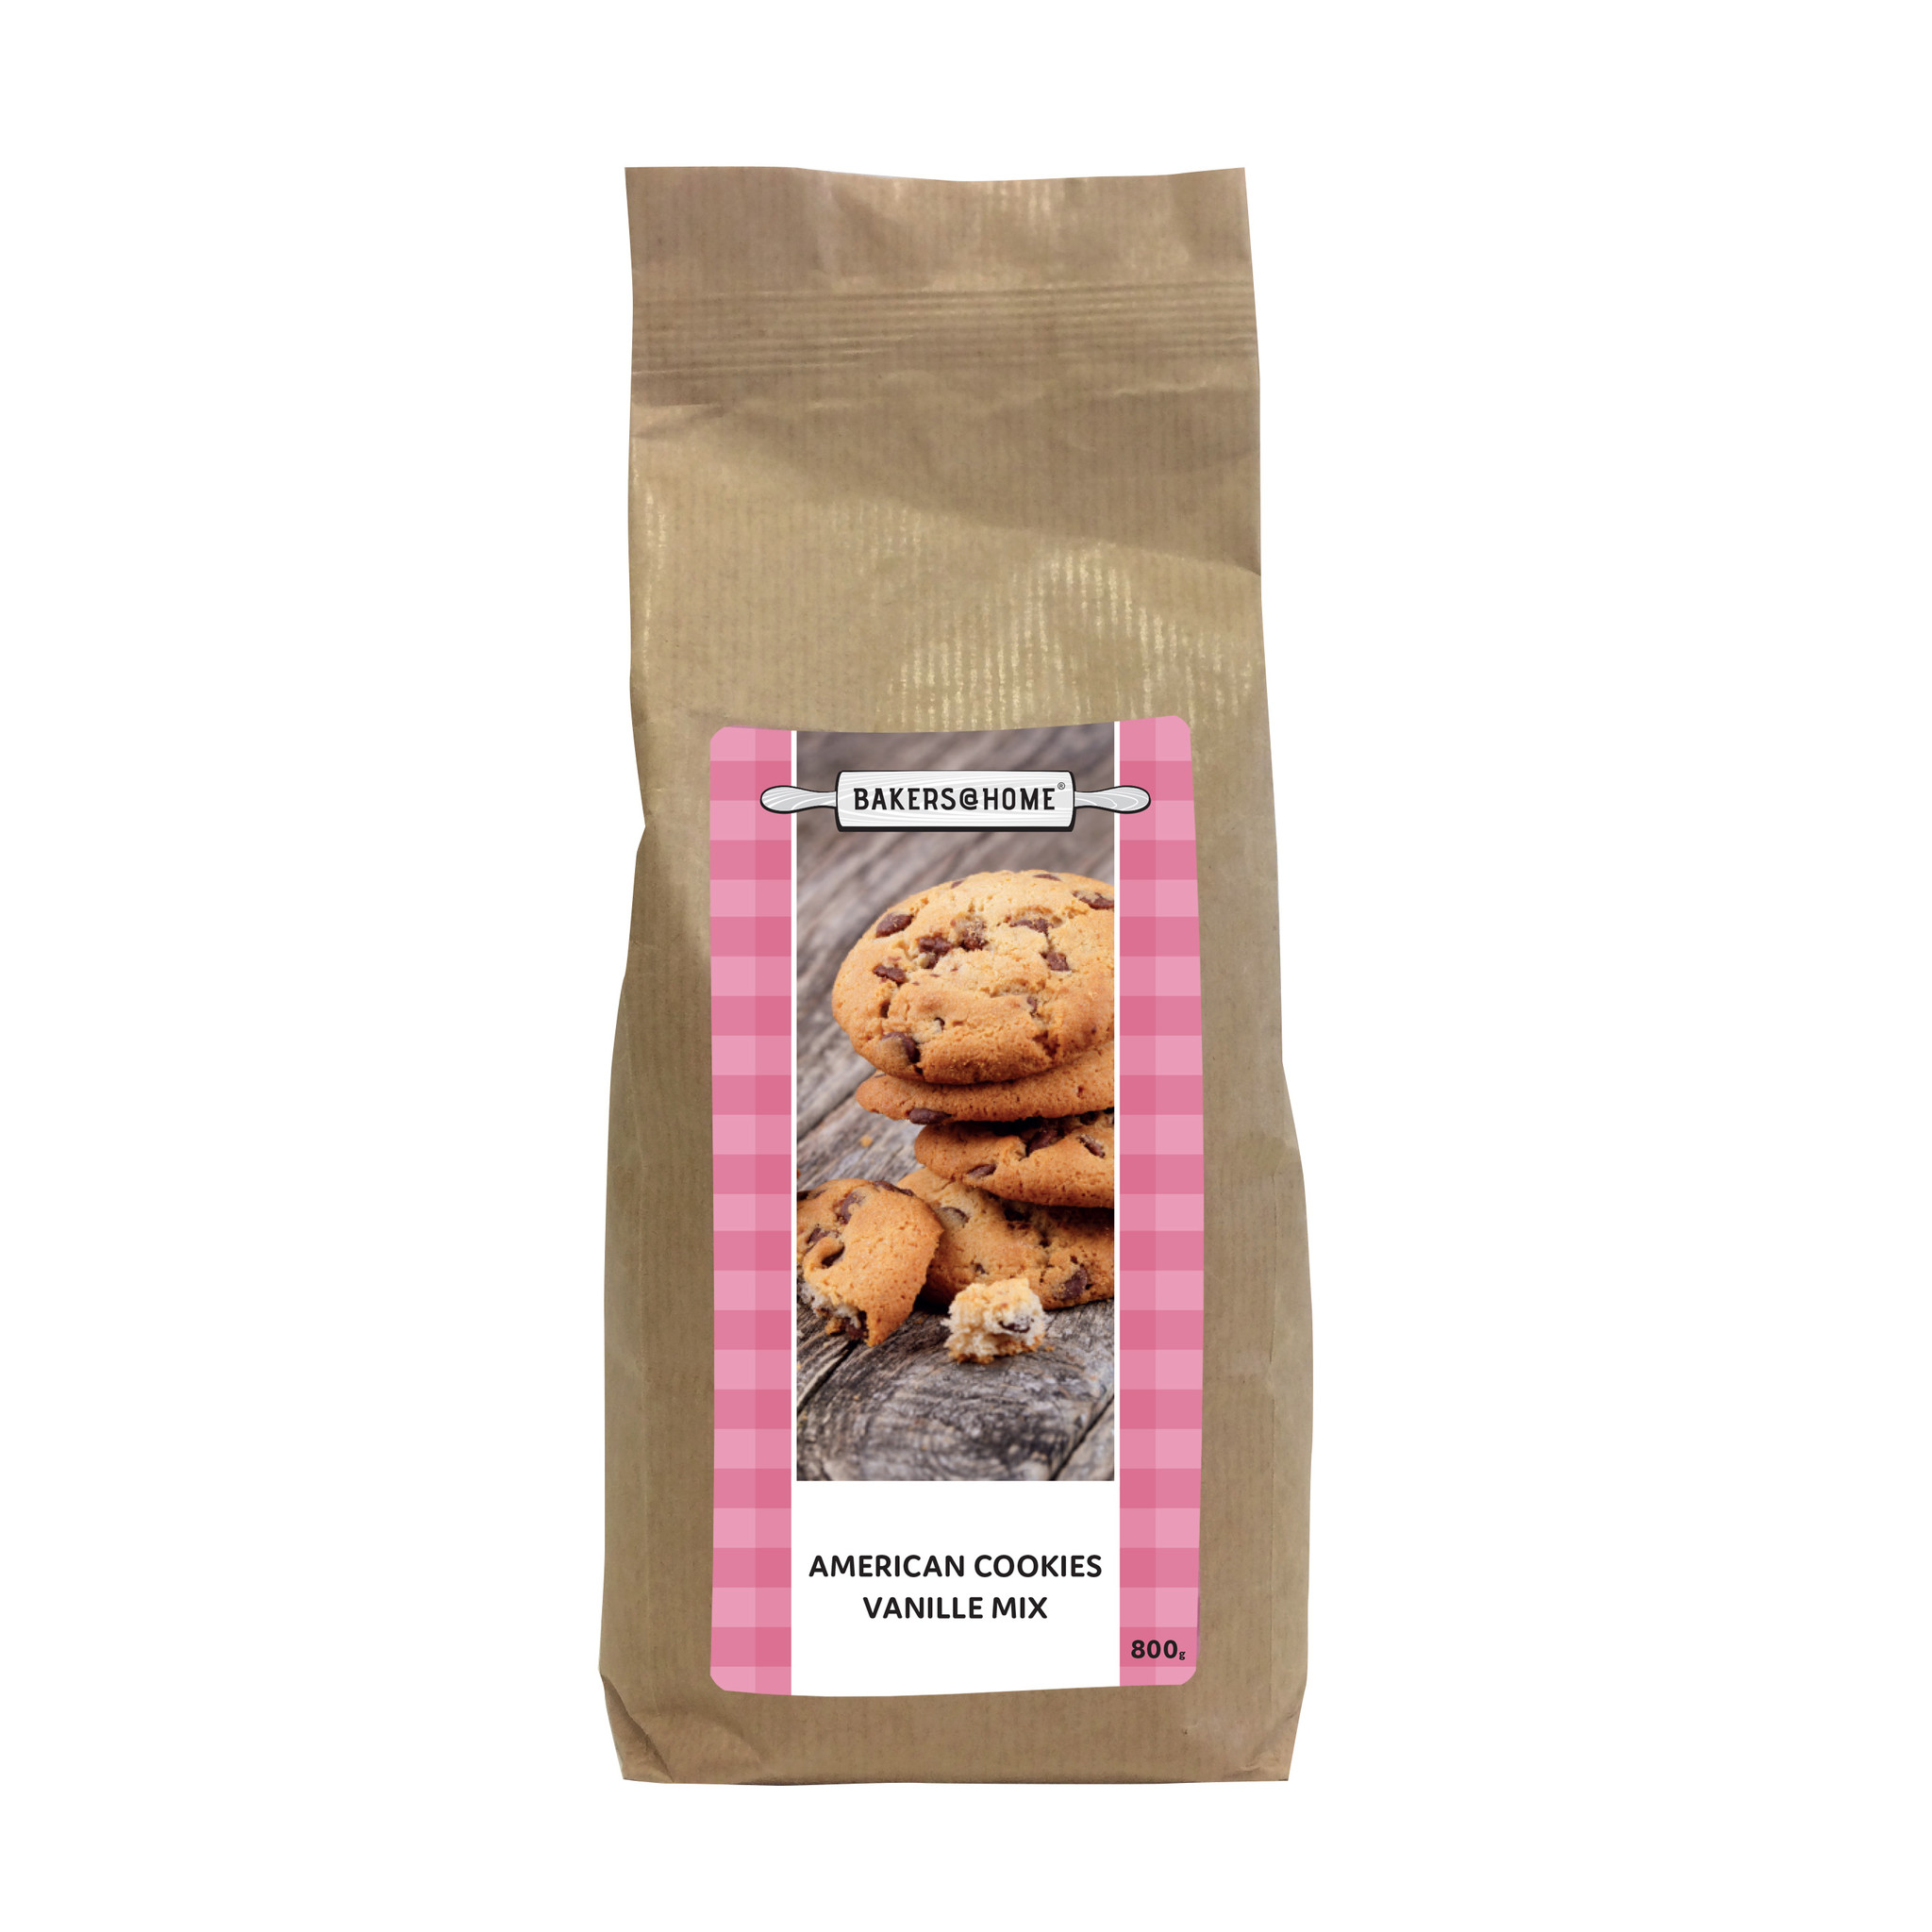 Bakers@Home American cookies vanilla mix (limited shelf life)